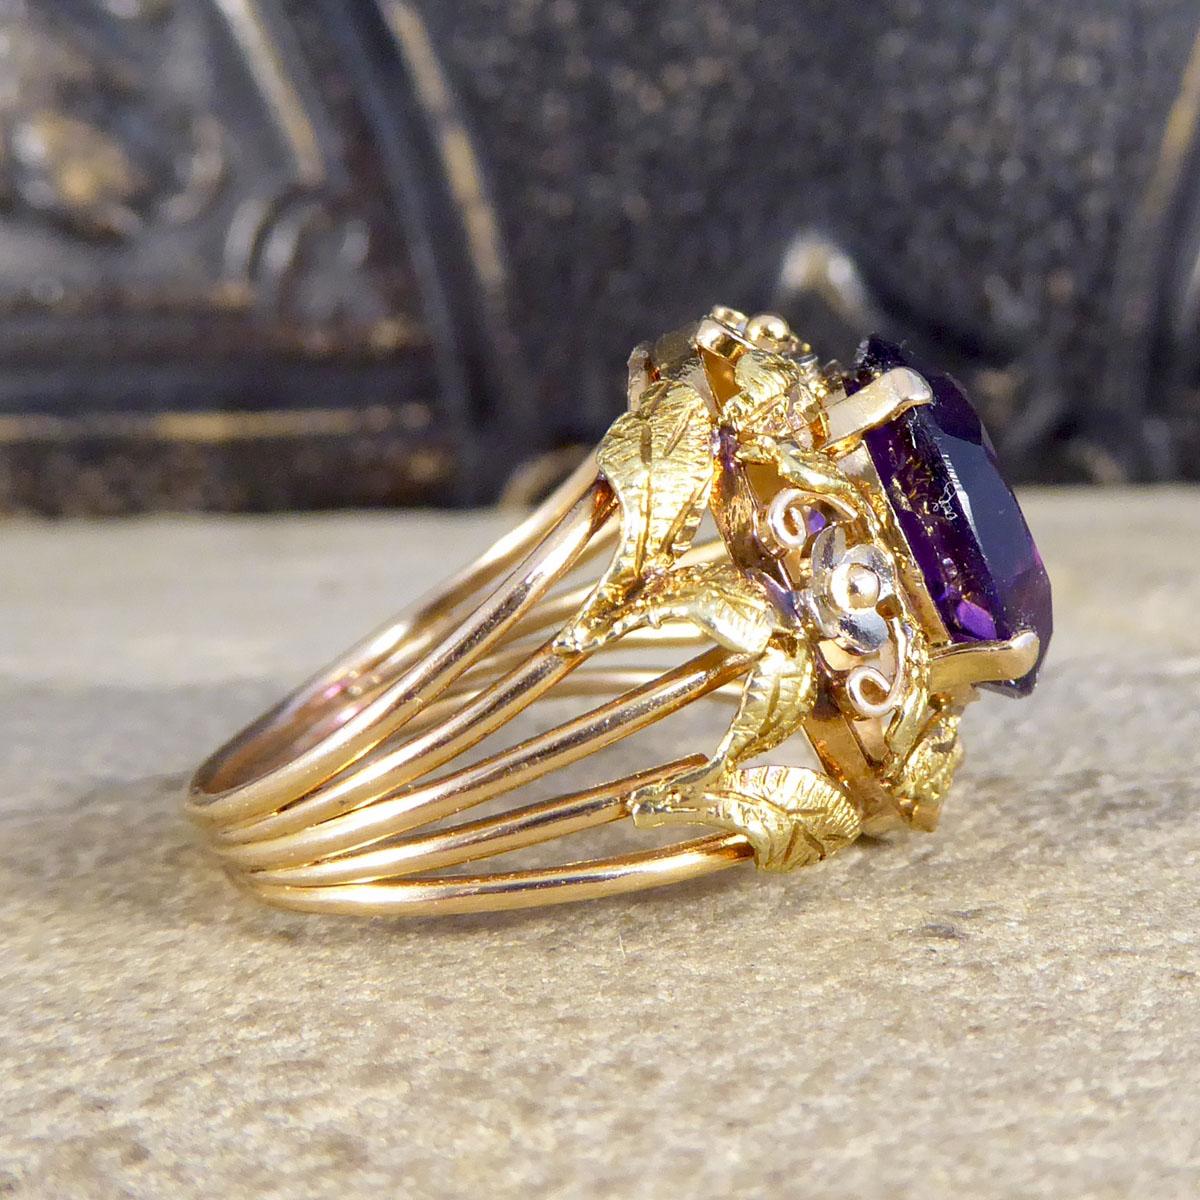 Such a gorgeous vintage ring that has been crafted in the 1950's. It features a beautiful big and vibrant Amethyst gemstone in the centre with a claw setting. The ring itself has a filigree pattern to the head and down the shoulders crafted in 14ct